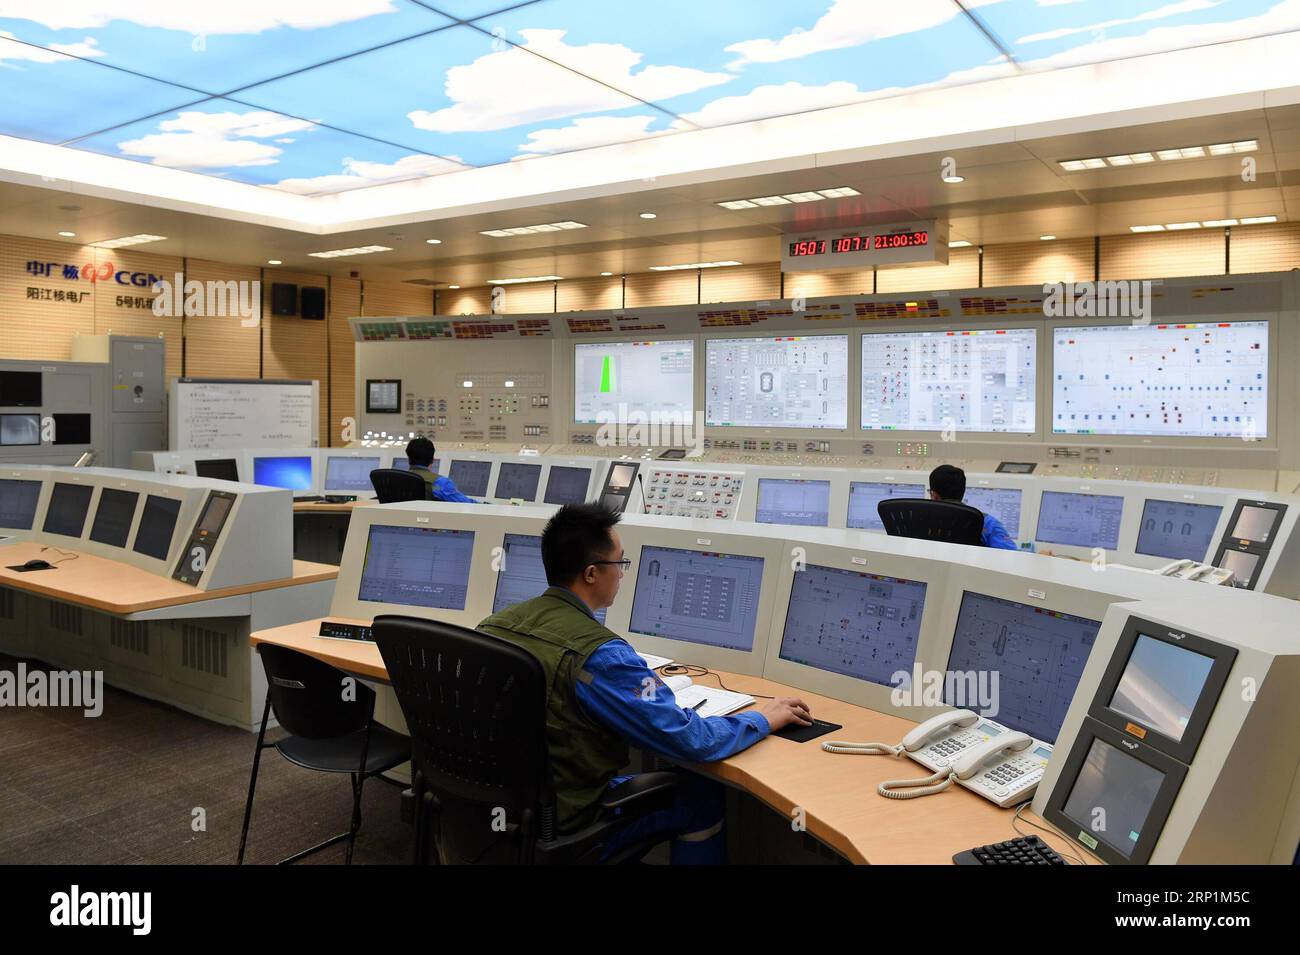 (180713) -- GUANGZHOU, July 13, 2018 -- Staff members work in the main control room of the fifth unit of the Yangjiang nuclear power plant in Yangjiang, south China s Guangdong Province, July 12, 2018. The fifth unit of the Yangjiang nuclear power plant is ready for commercial operation, said China General Nuclear Power Corp. (CGN), the owner of the plant, on Friday. (lmm) CHINA-GUANGDONG-NUCLEAR POWER PLANT-UNIT-OPERATION (CN) ChenxJi PUBLICATIONxNOTxINxCHN Stock Photo